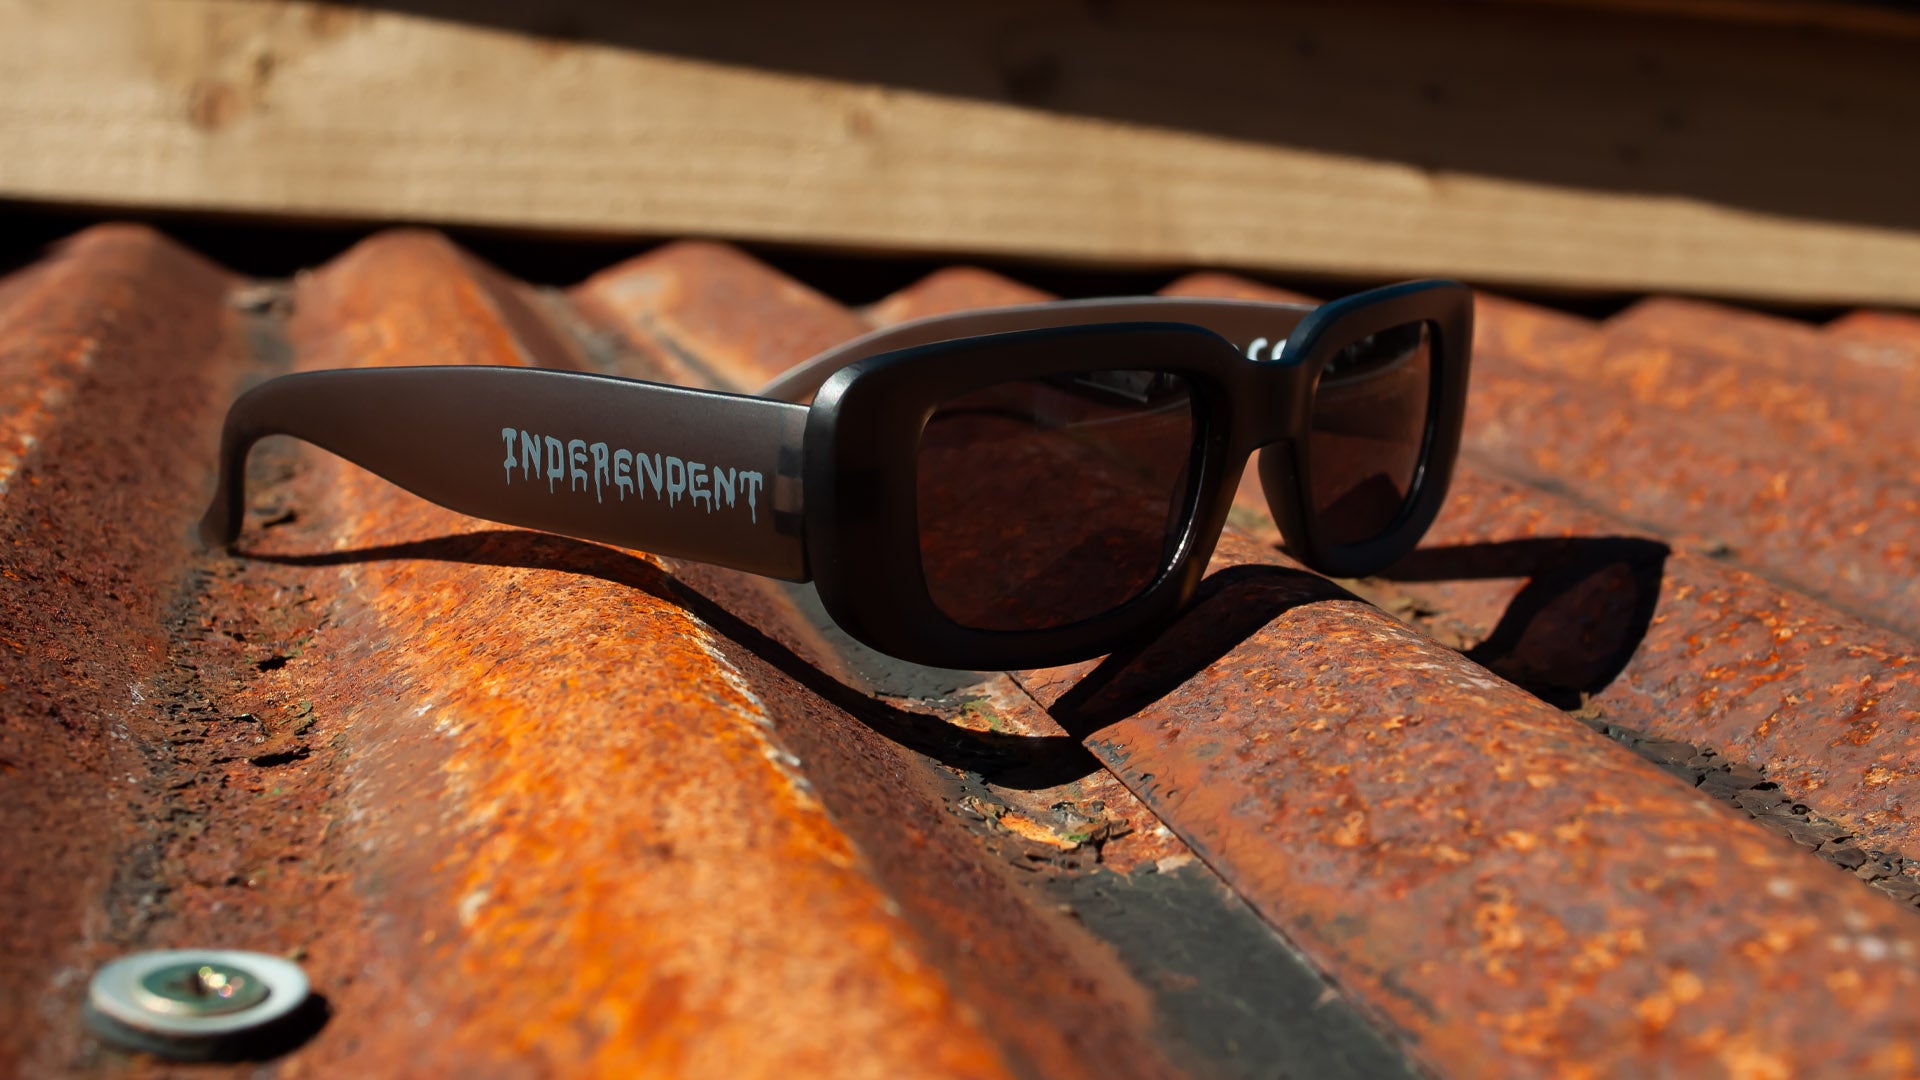 Independent Sunglasses at Prime Delux Store, Plymouth.